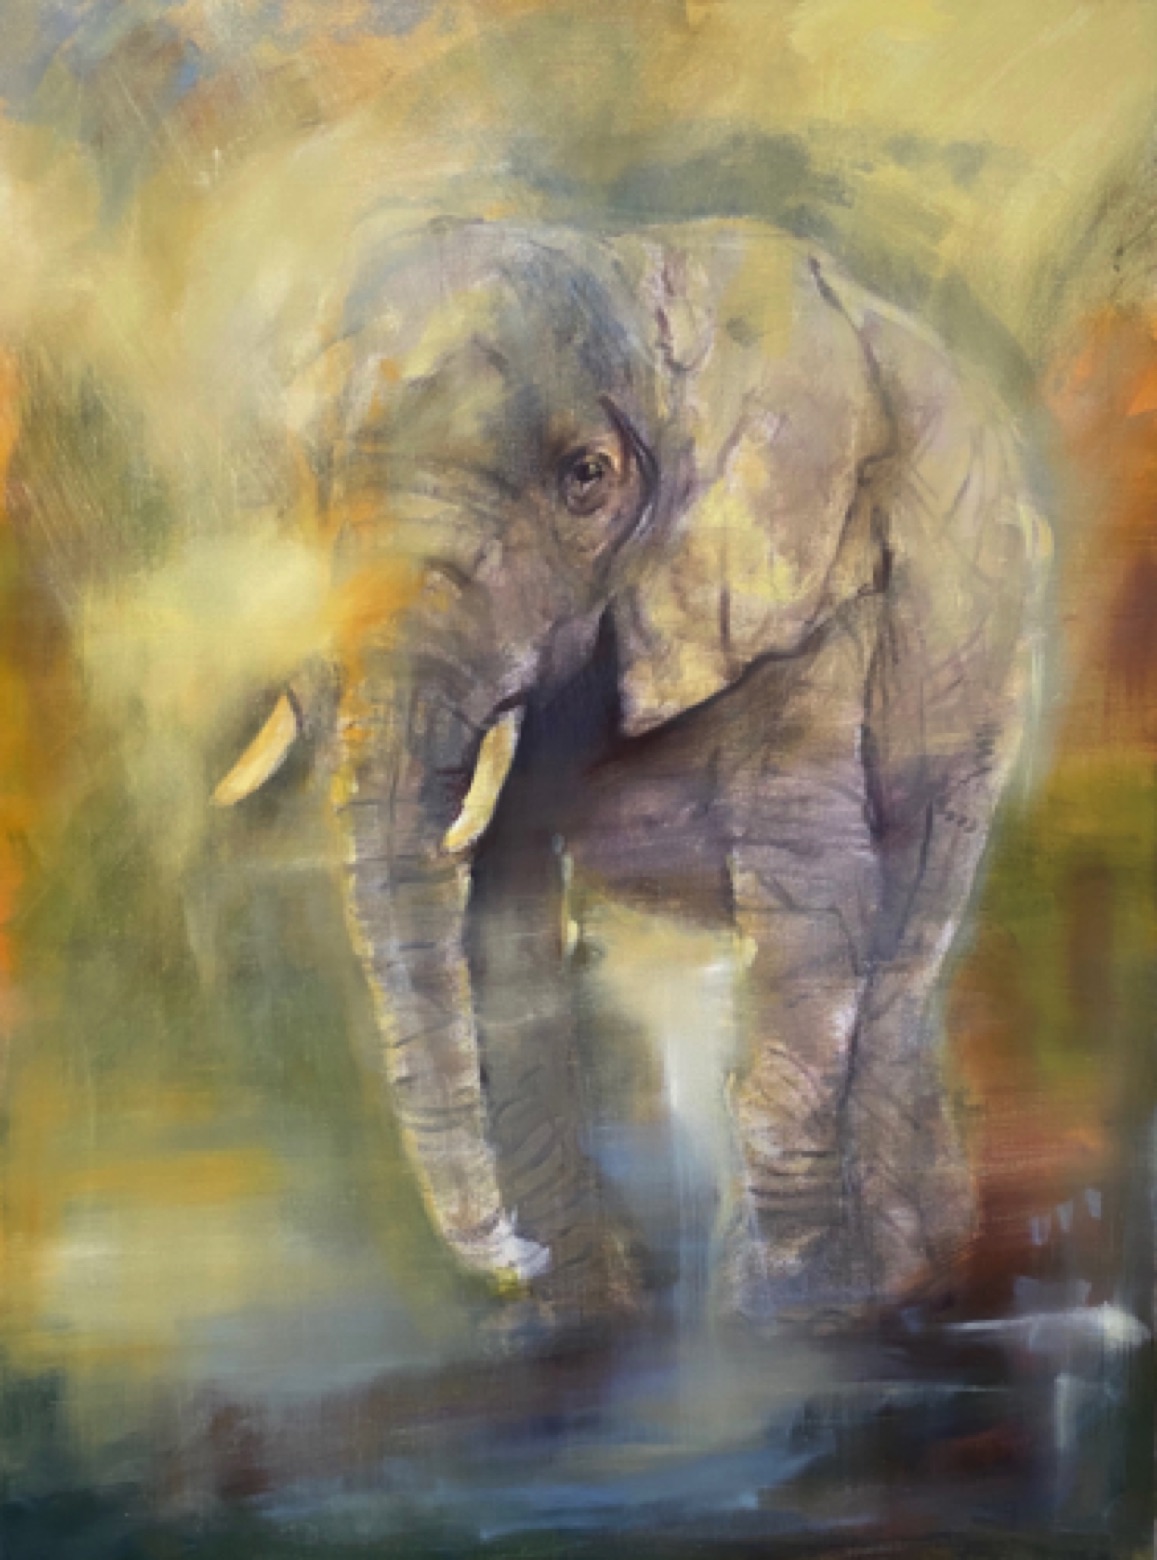 Gregg Chadwick 
When Elephants Weep
 48"x36" oil on linen 2020
Kate Cameron Daum Collection, Crowthorne, United Kingdom